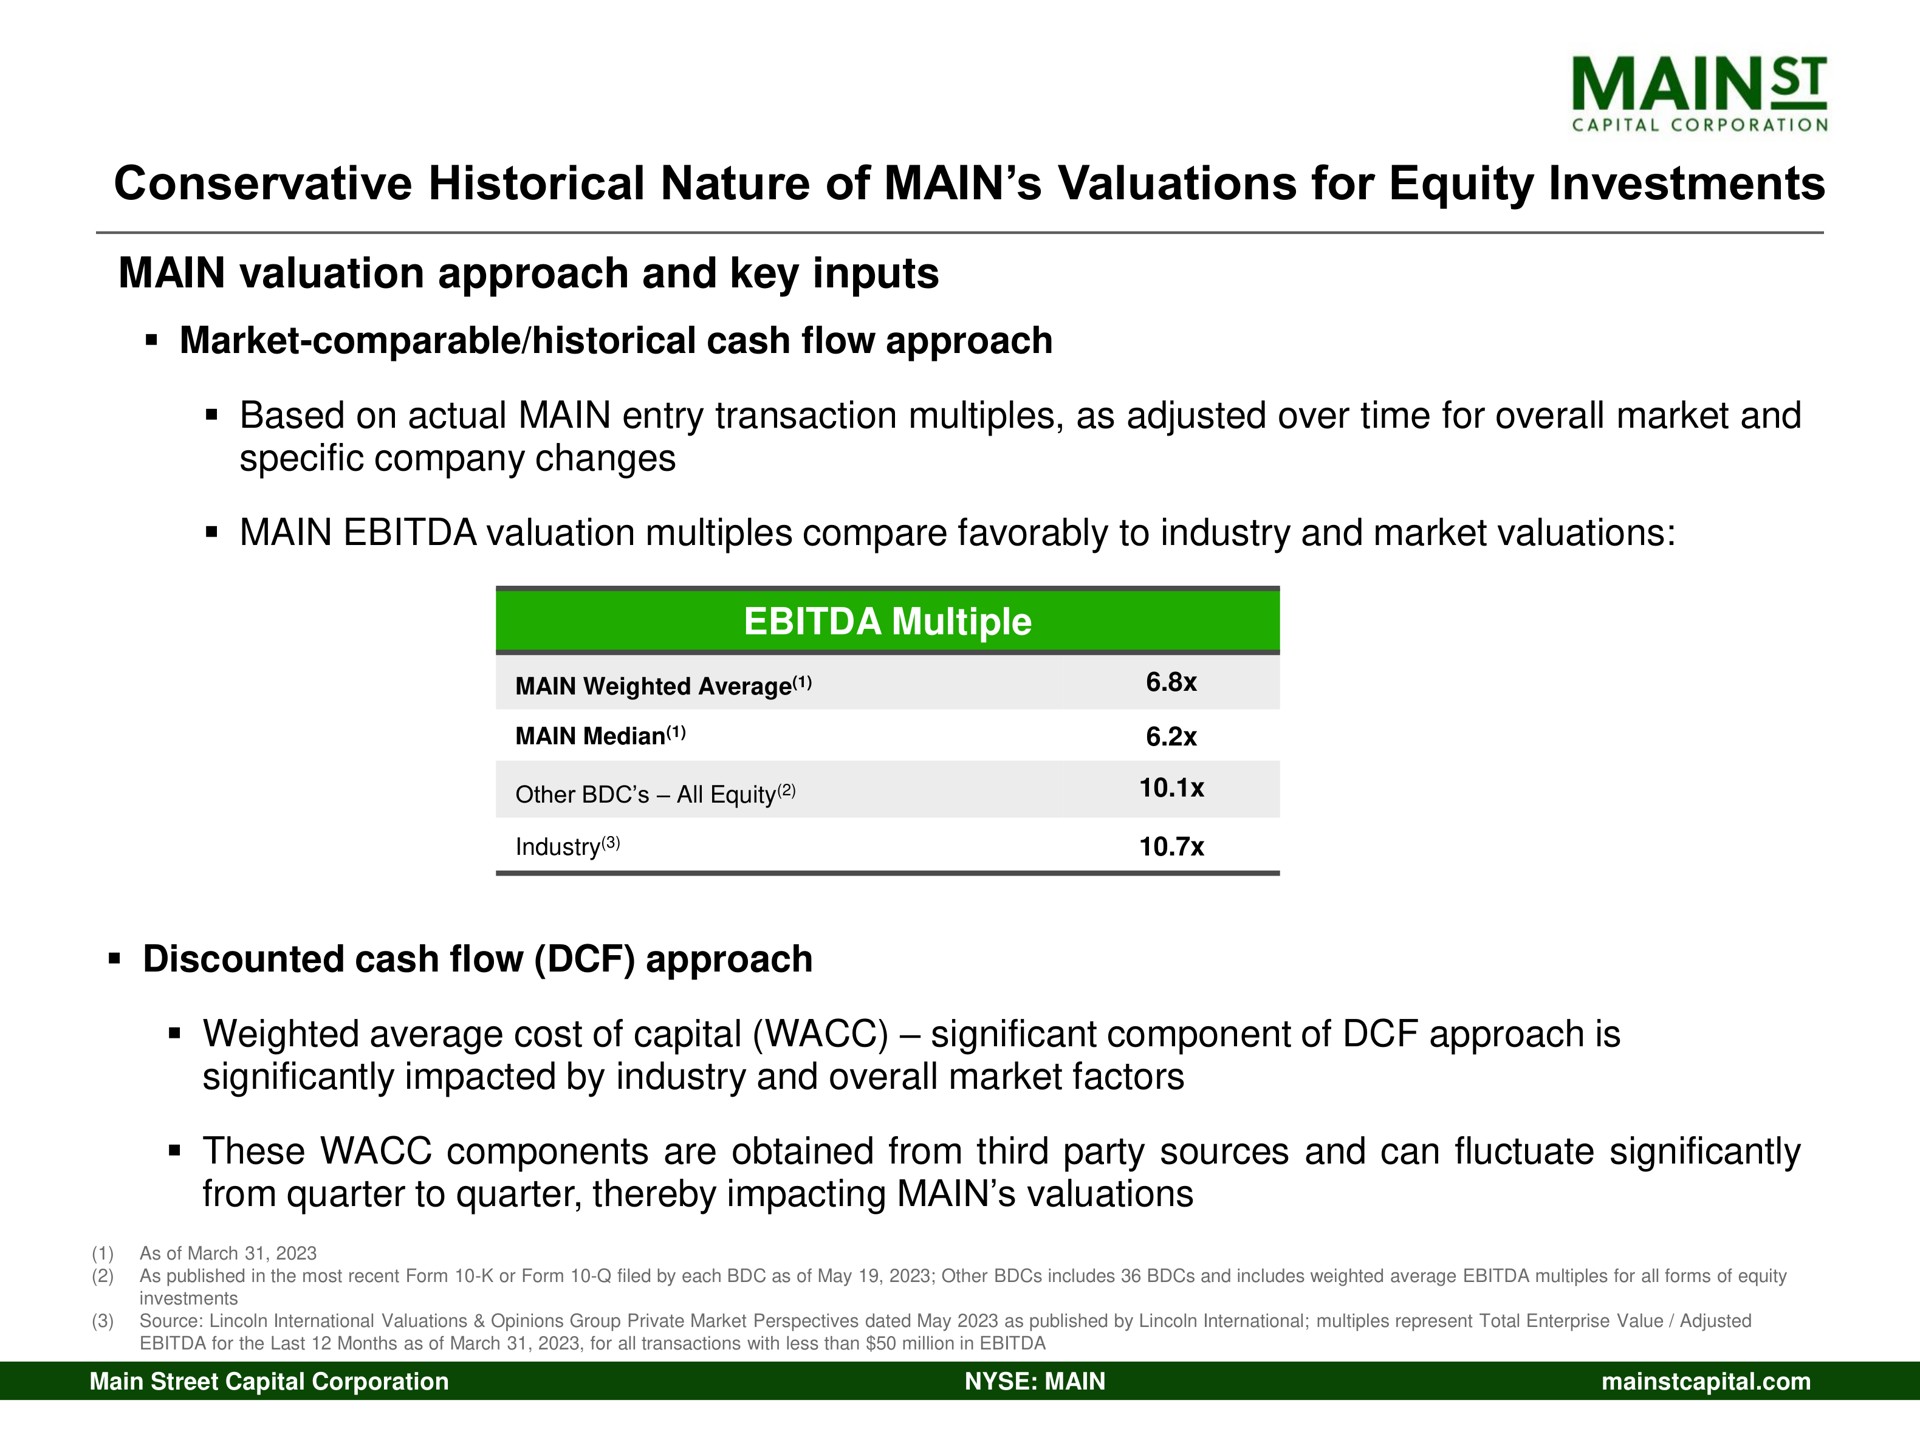 conservative historical nature of main valuations for equity investments main valuation approach and key inputs | Main Street Capital